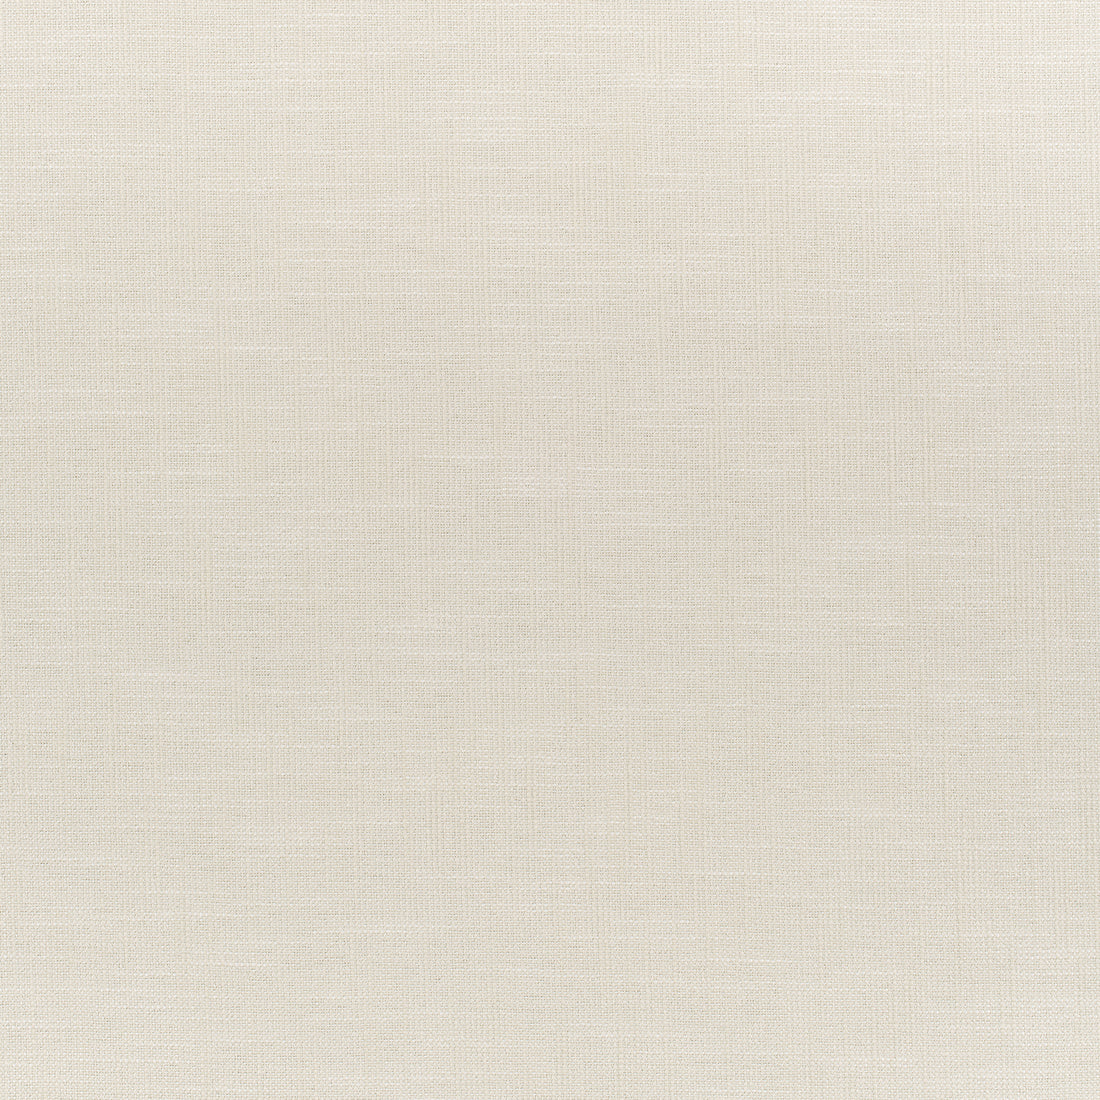 Bailey fabric in almond color - pattern number W80514 - by Thibaut in the Mosaic collection